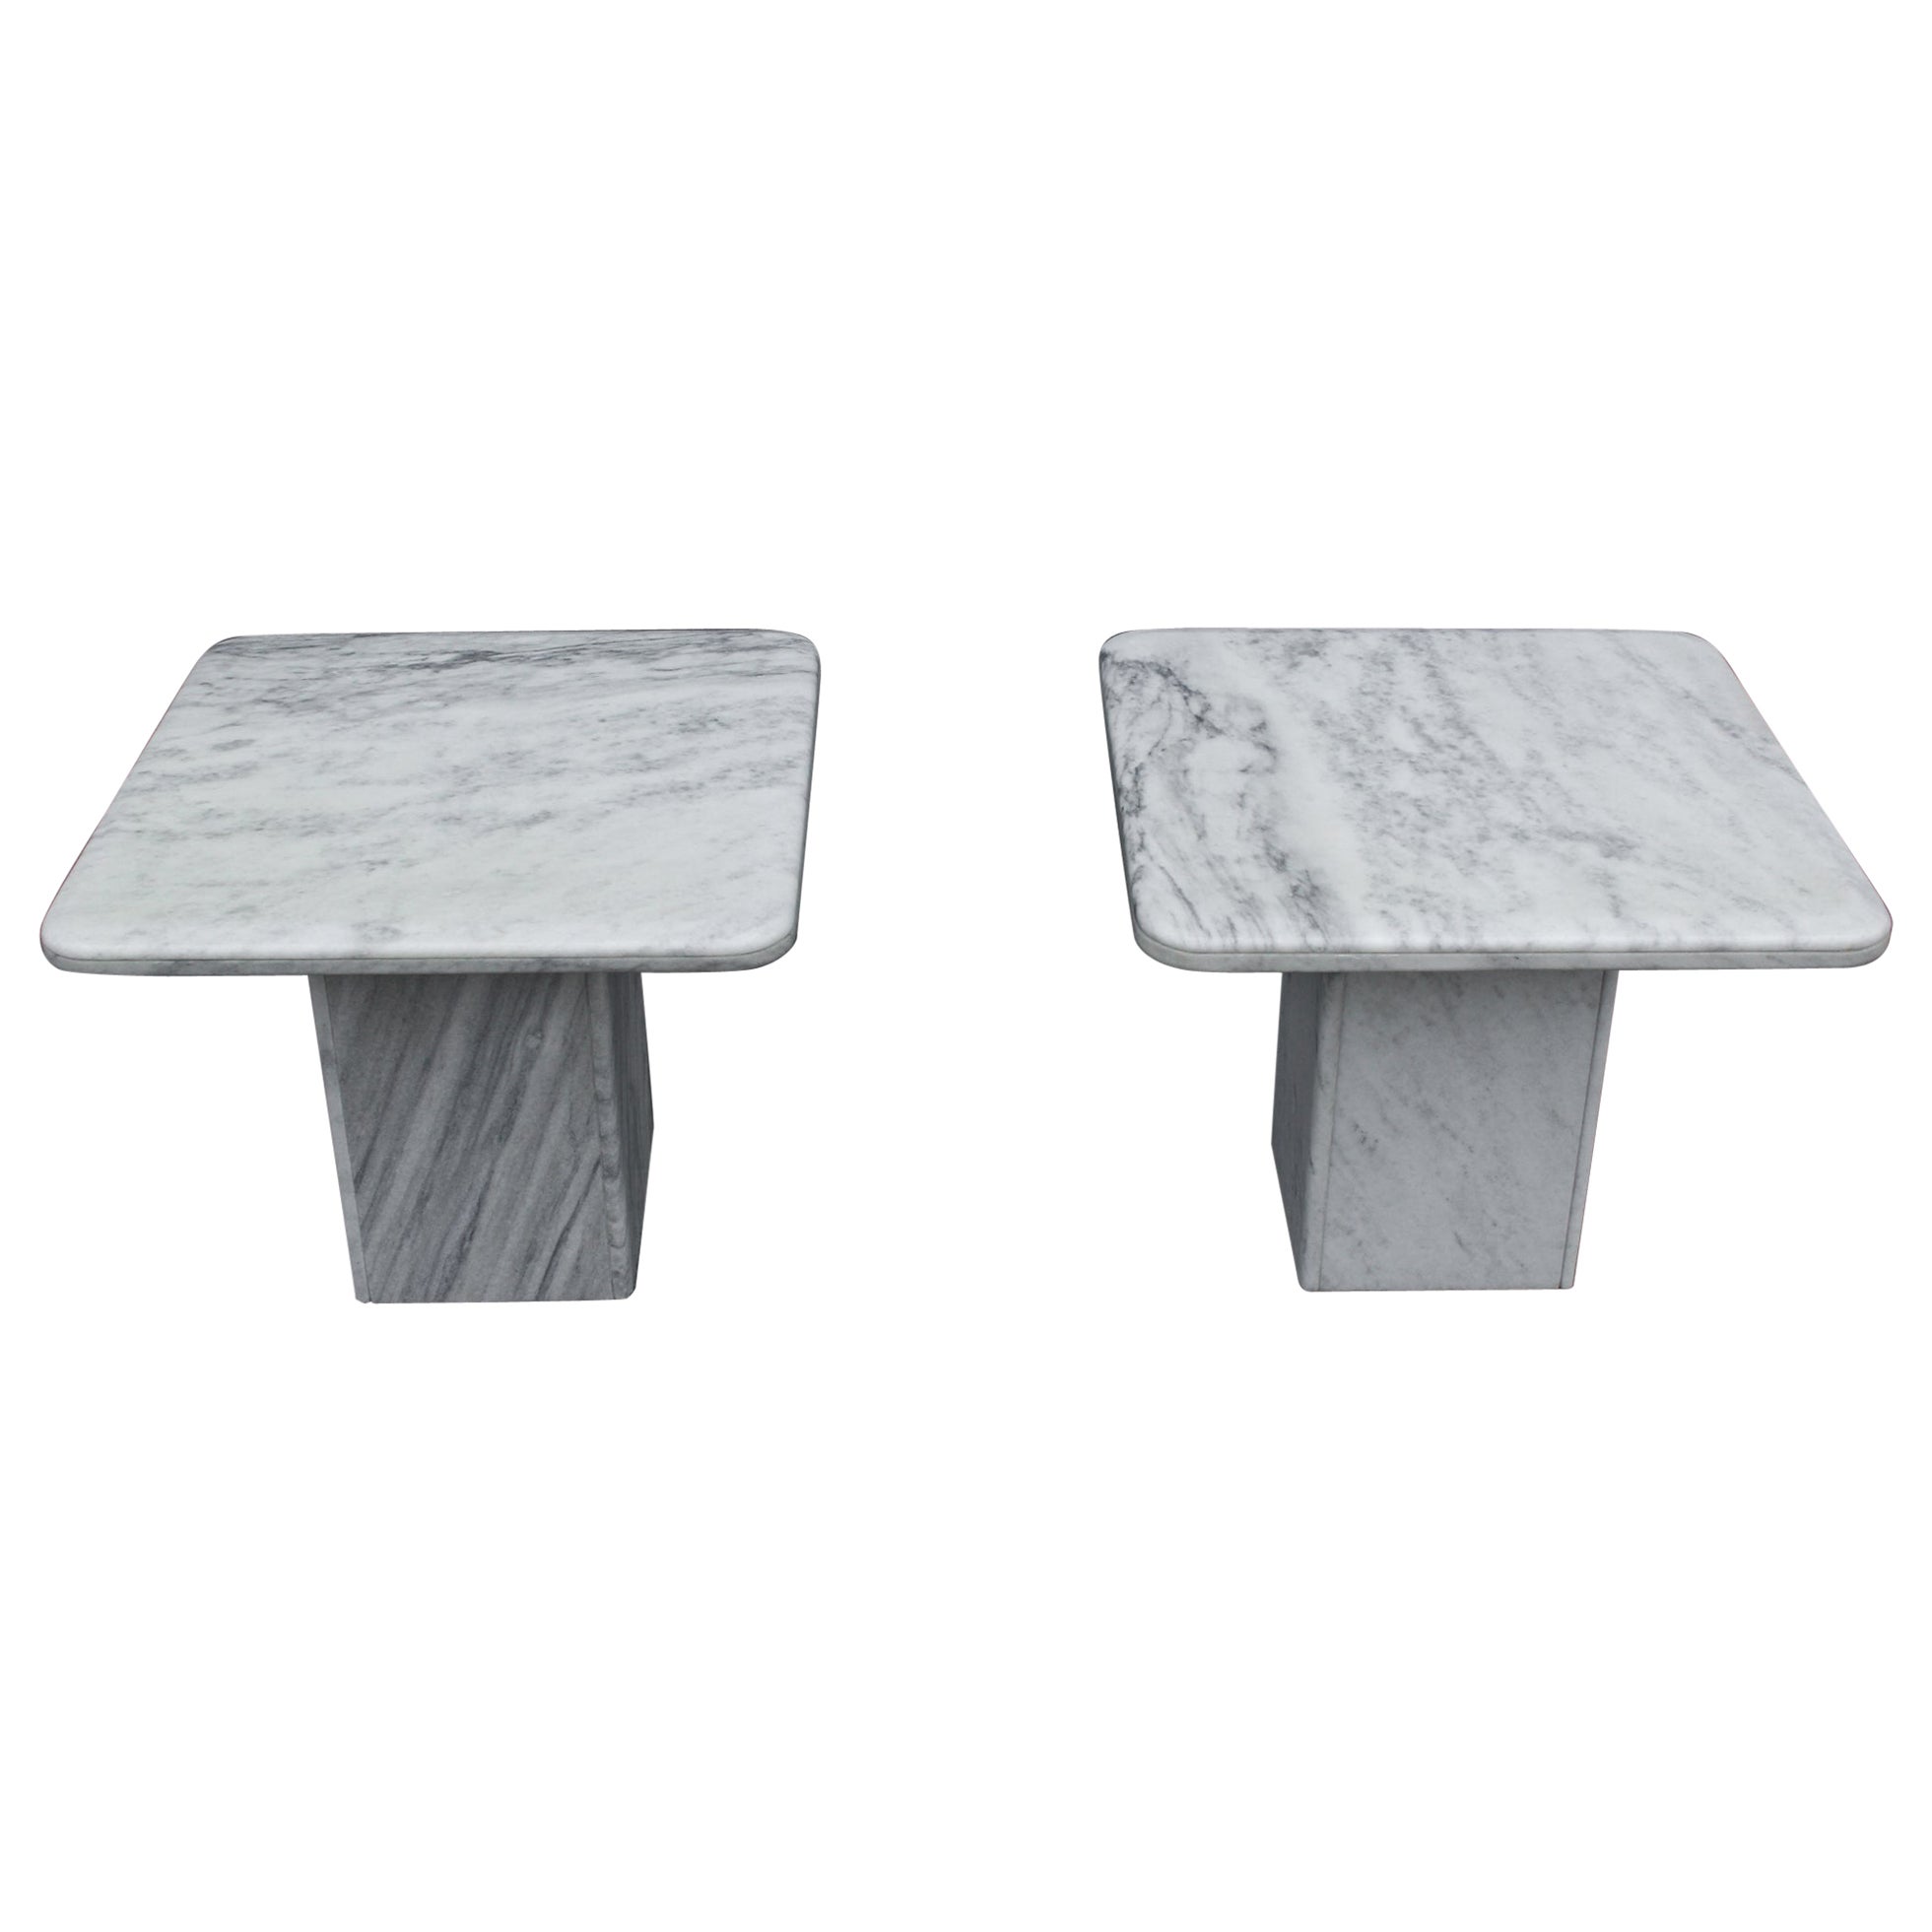 Pair of Italian Side Tables in White Marble With Grey Veining 1970s For Sale